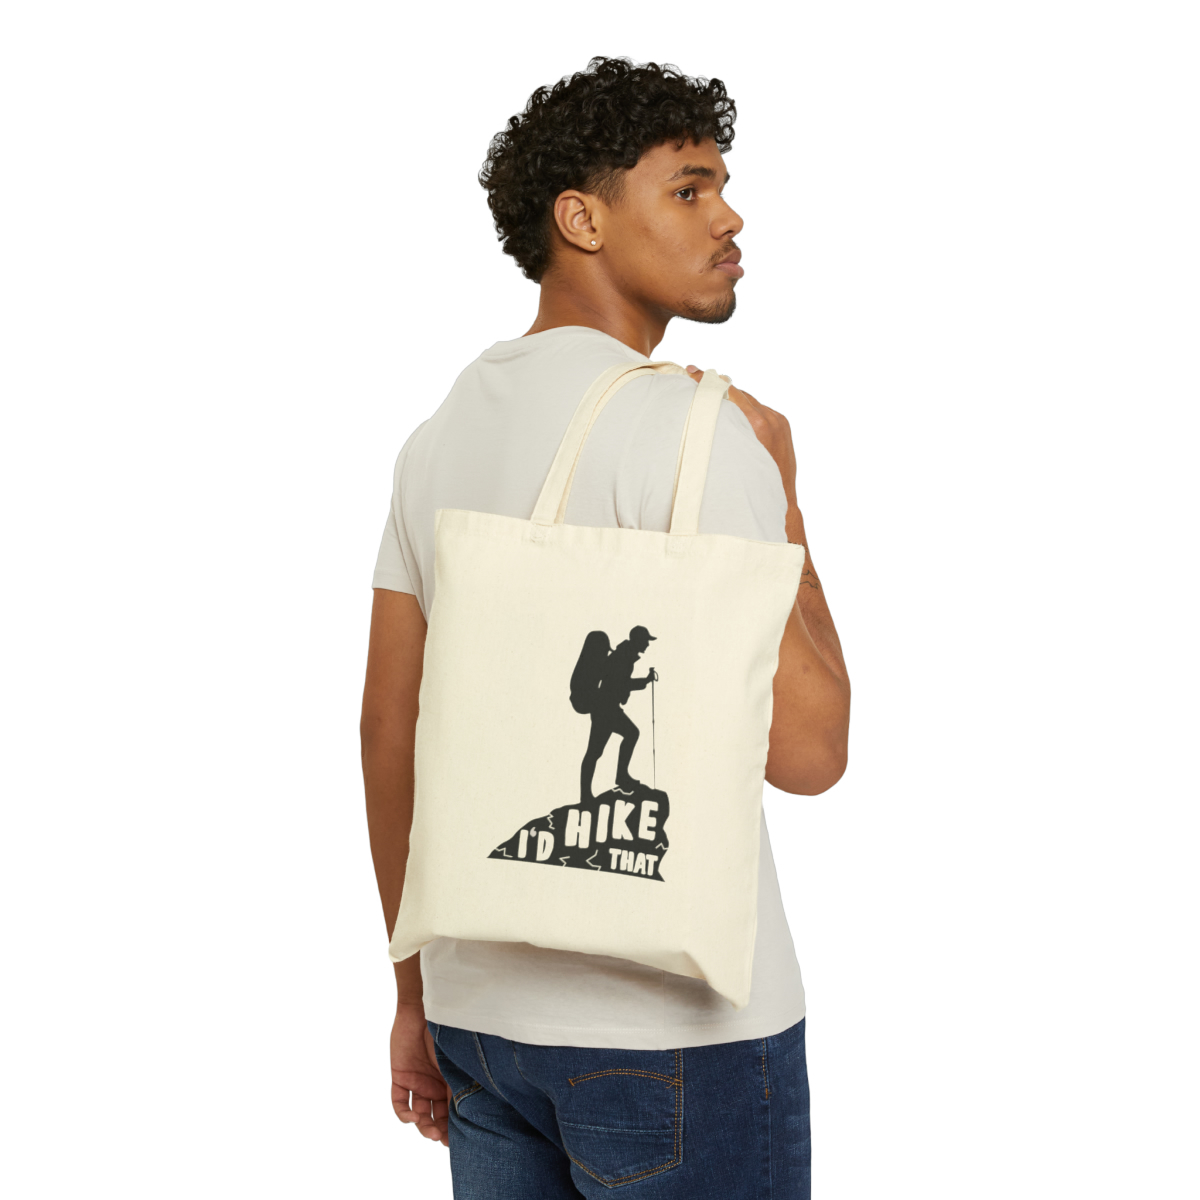 Primary image for I'd Hike That Unisex Cotton Canvas Tote Bag with Durable Handles